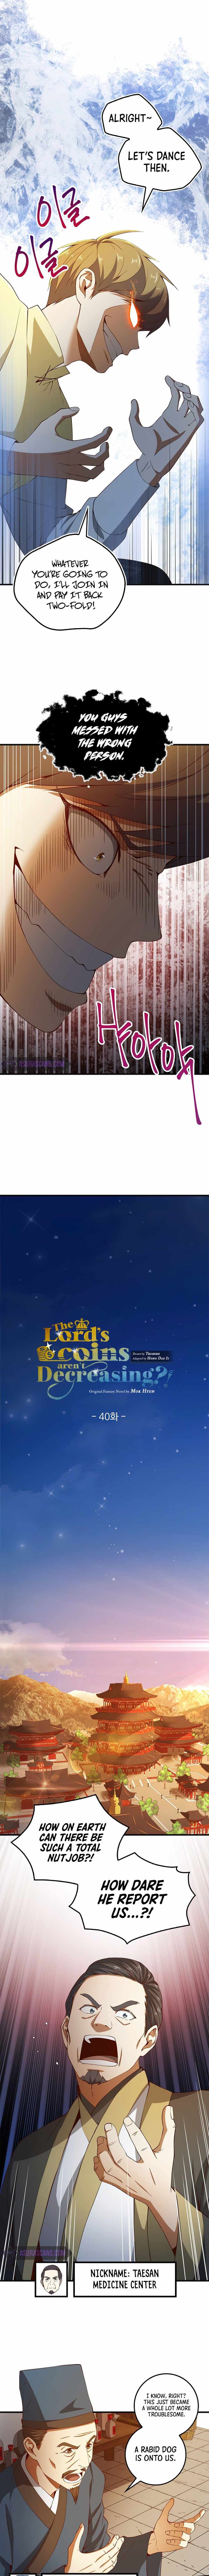 the_lords_coins_arent_decreasing_40_3